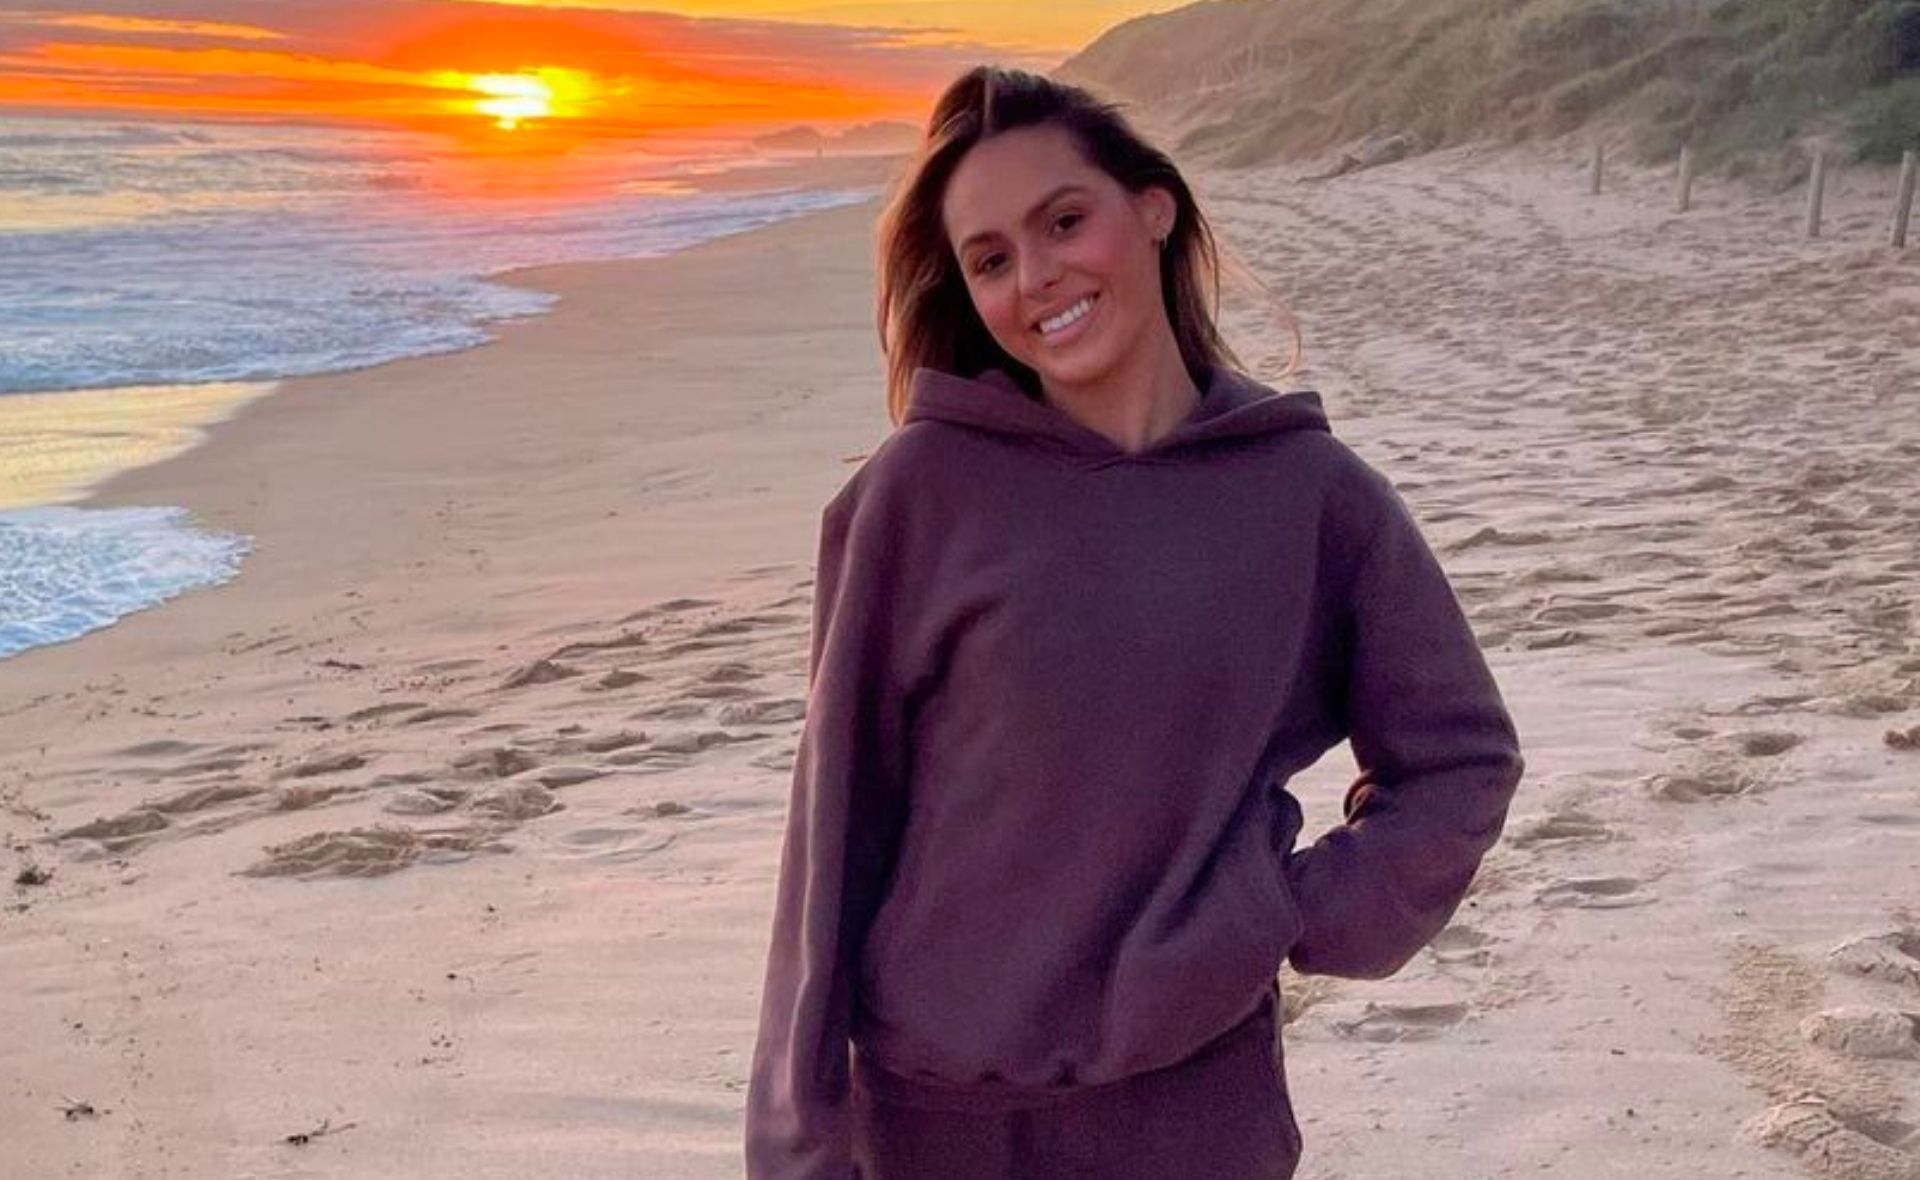 “Changing it up”: Mia Fevola unveils her stunning hair transformation